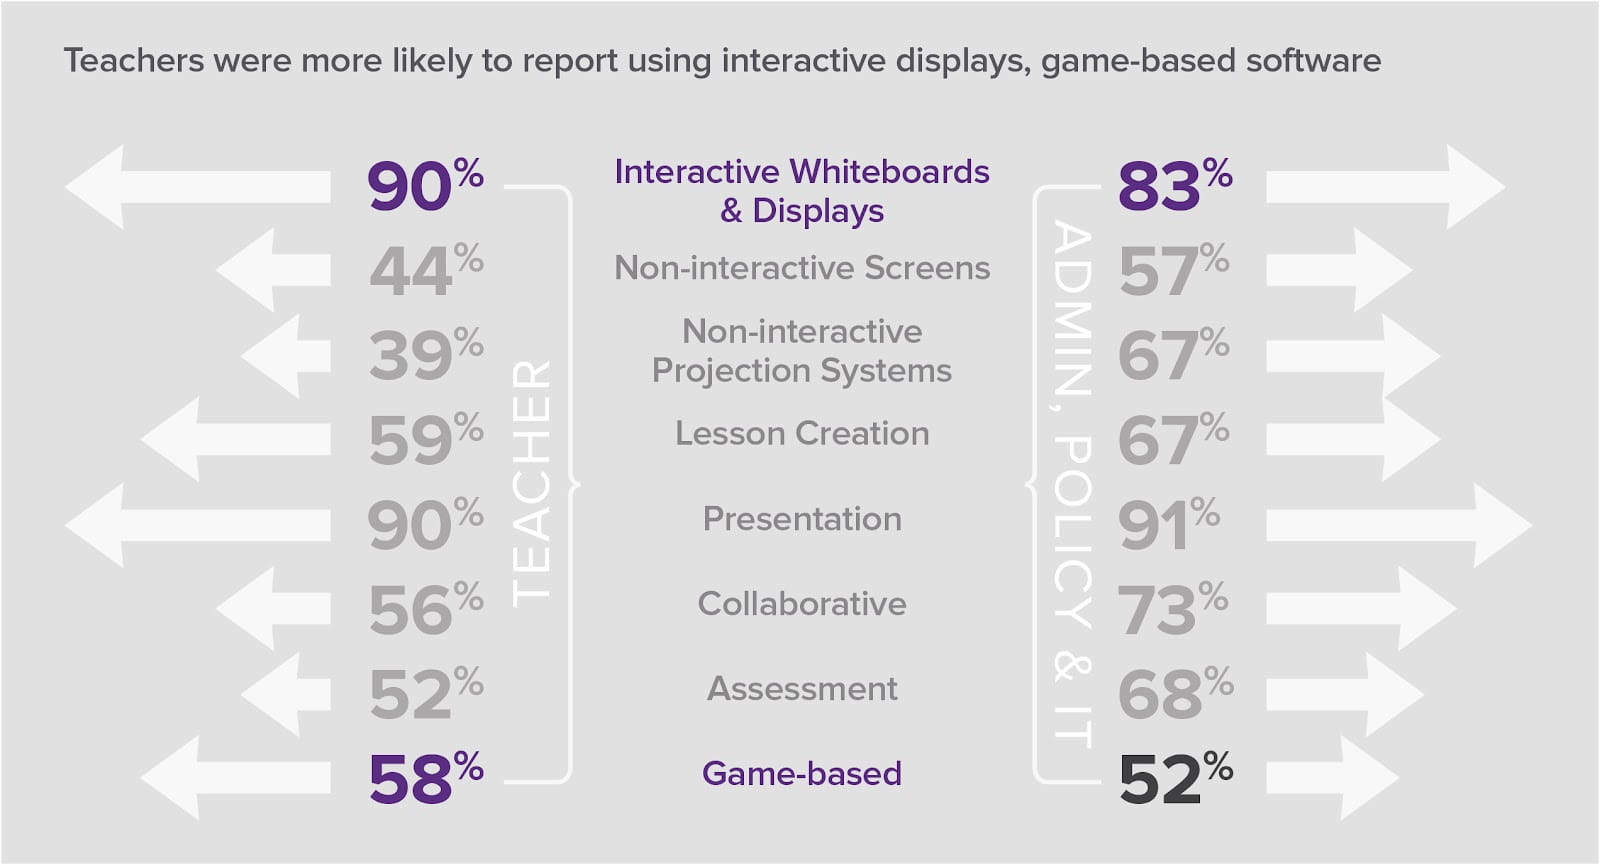 Teachers more likely to report using interactive displays, game-based software